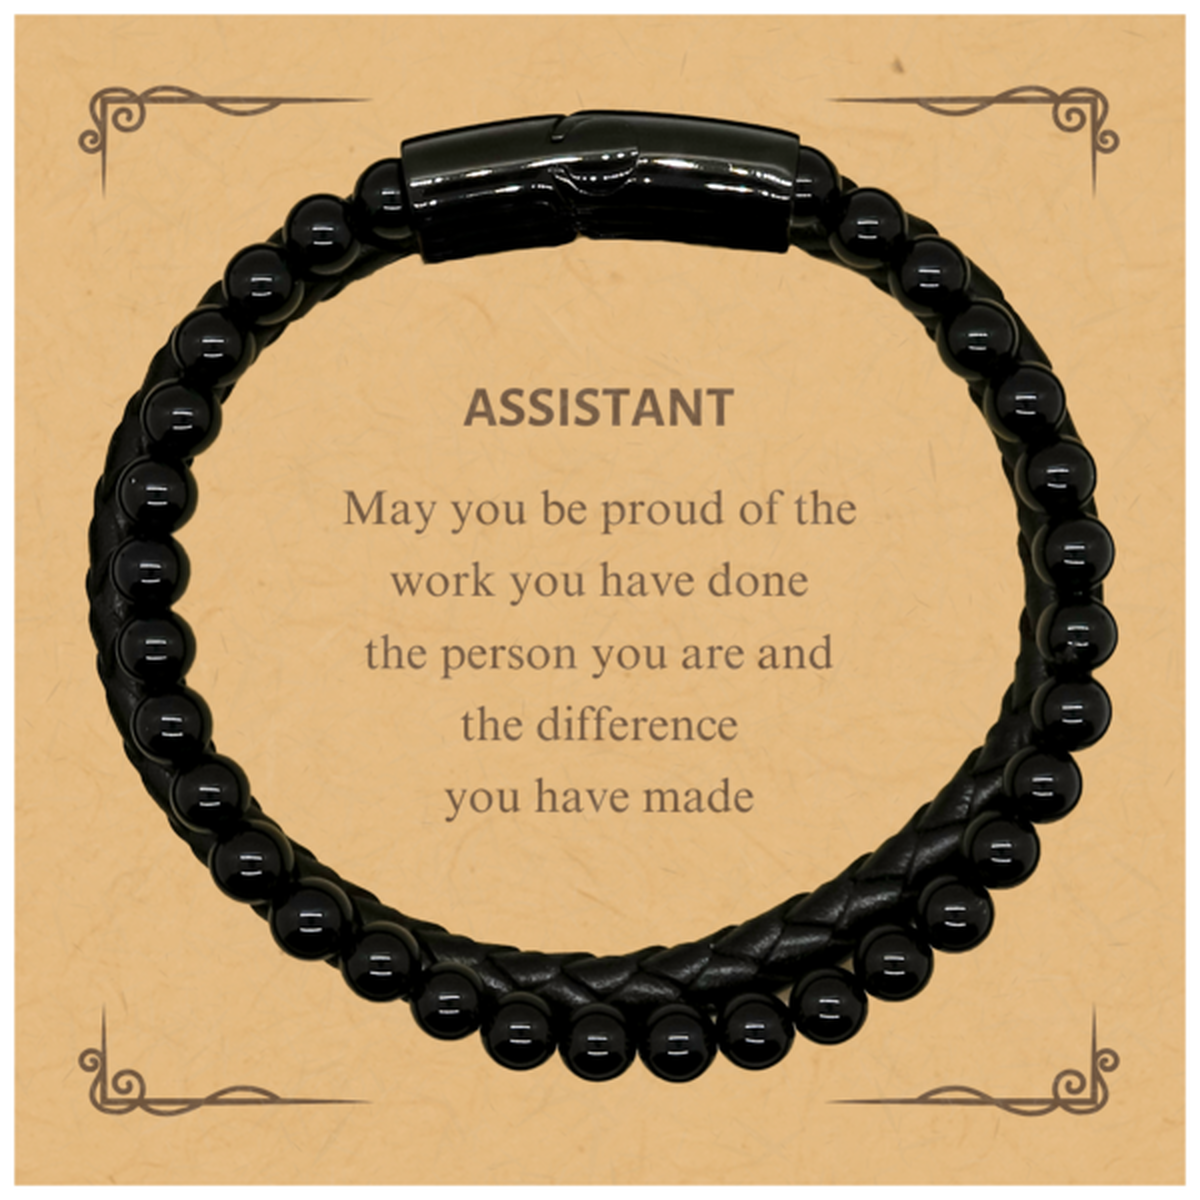 Assistant May you be proud of the work you have done, Retirement Assistant Stone Leather Bracelets for Colleague Appreciation Gifts Amazing for Assistant